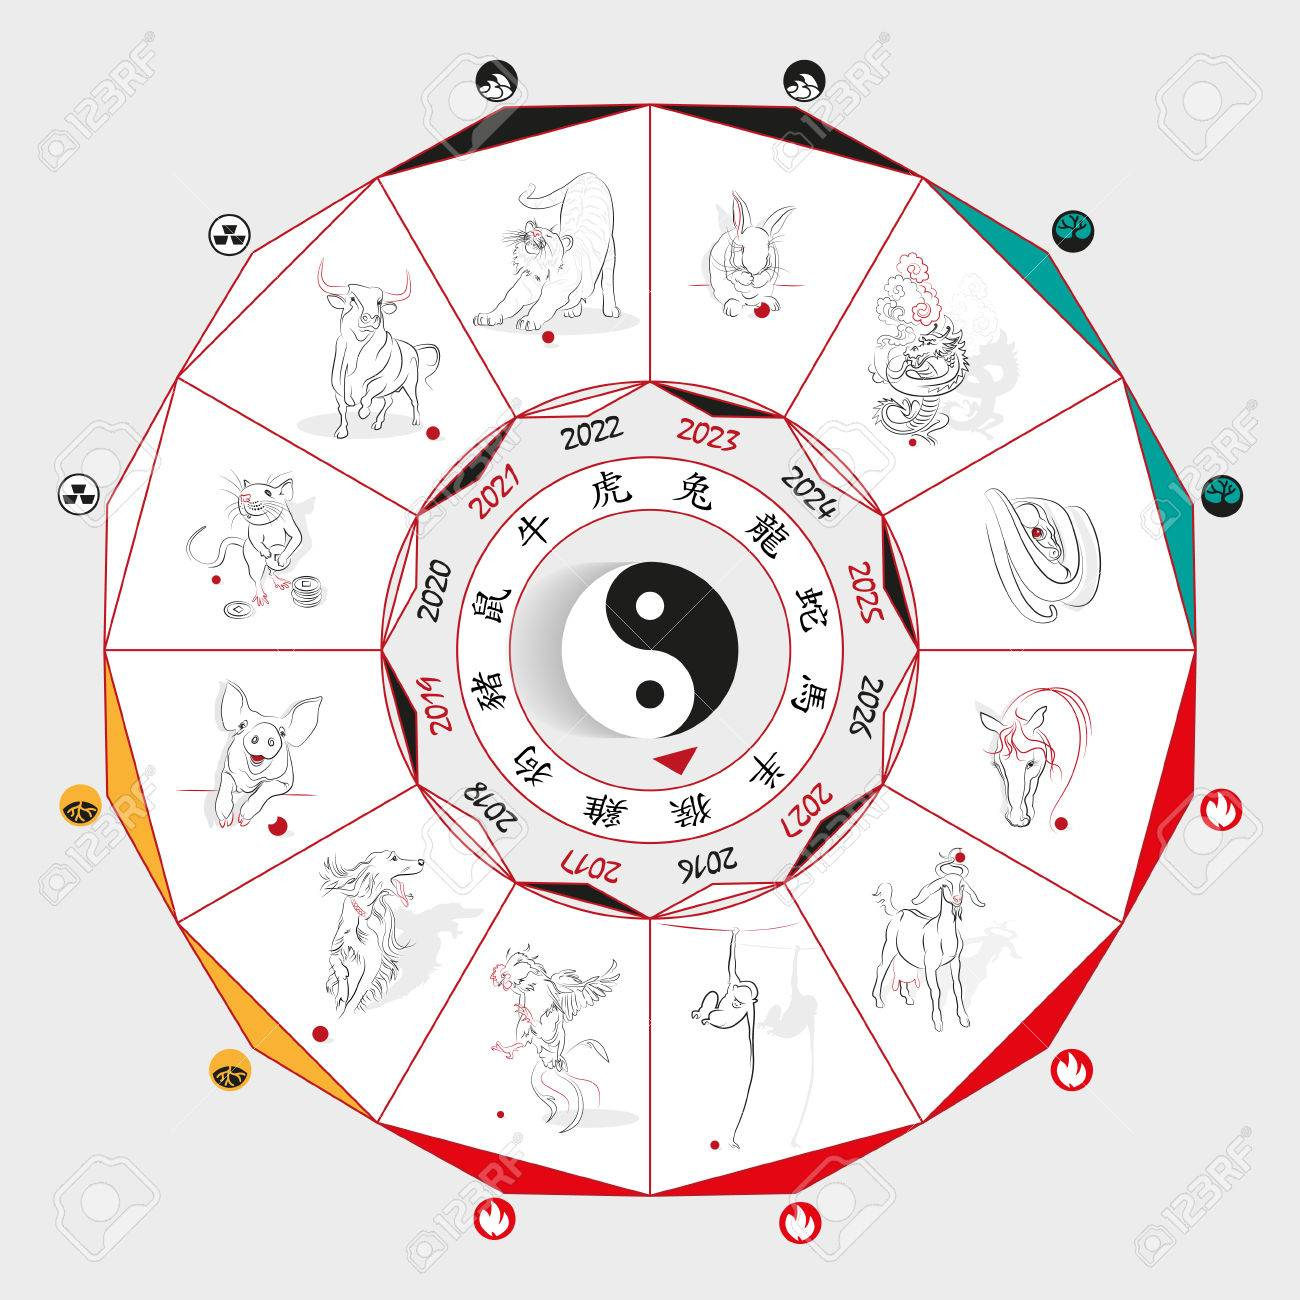 Chinese Zodiac Wheel With Signs And The Five Elements Symbols..